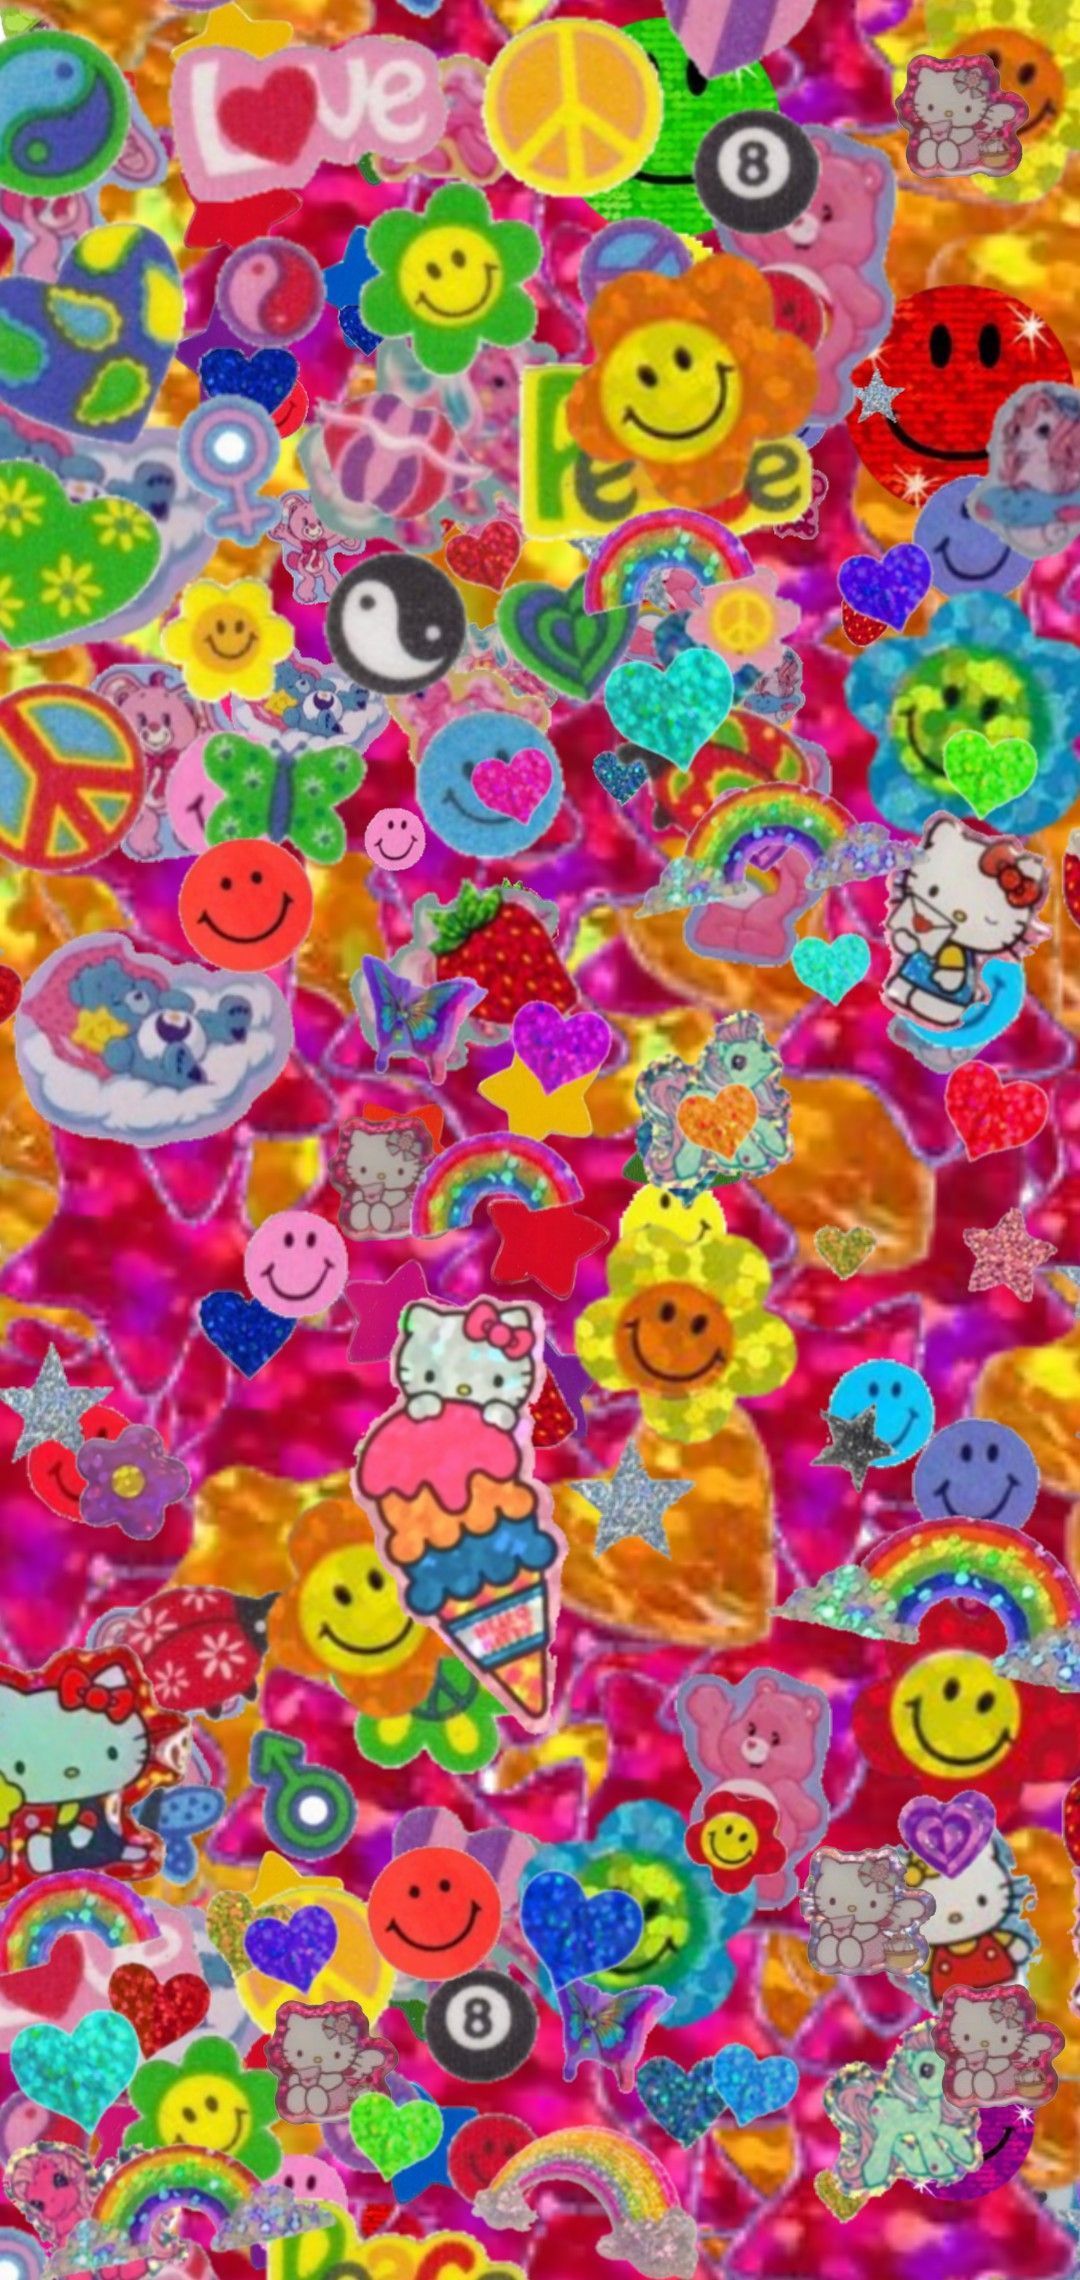 A colorful image with many different cartoon characters and symbols - Y2K